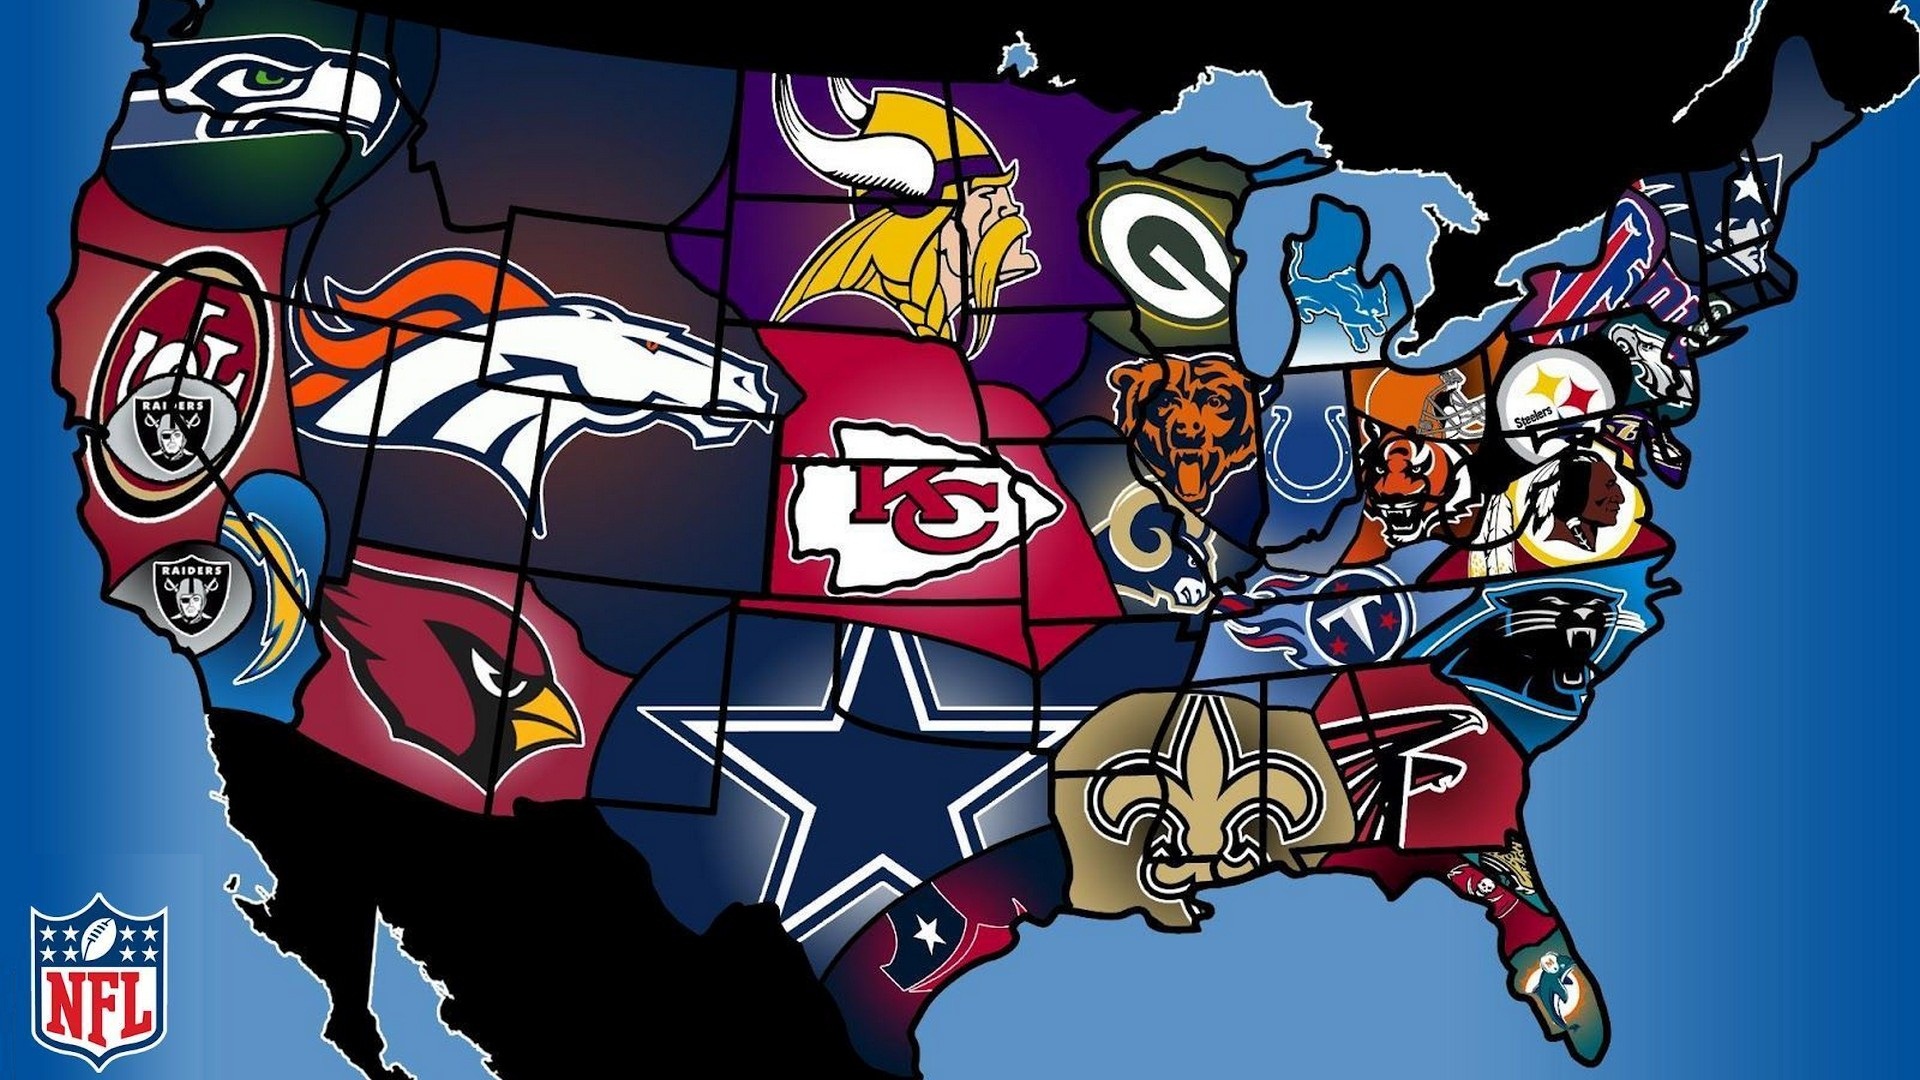 Cool NFL For PC Wallpaper 1920x1080